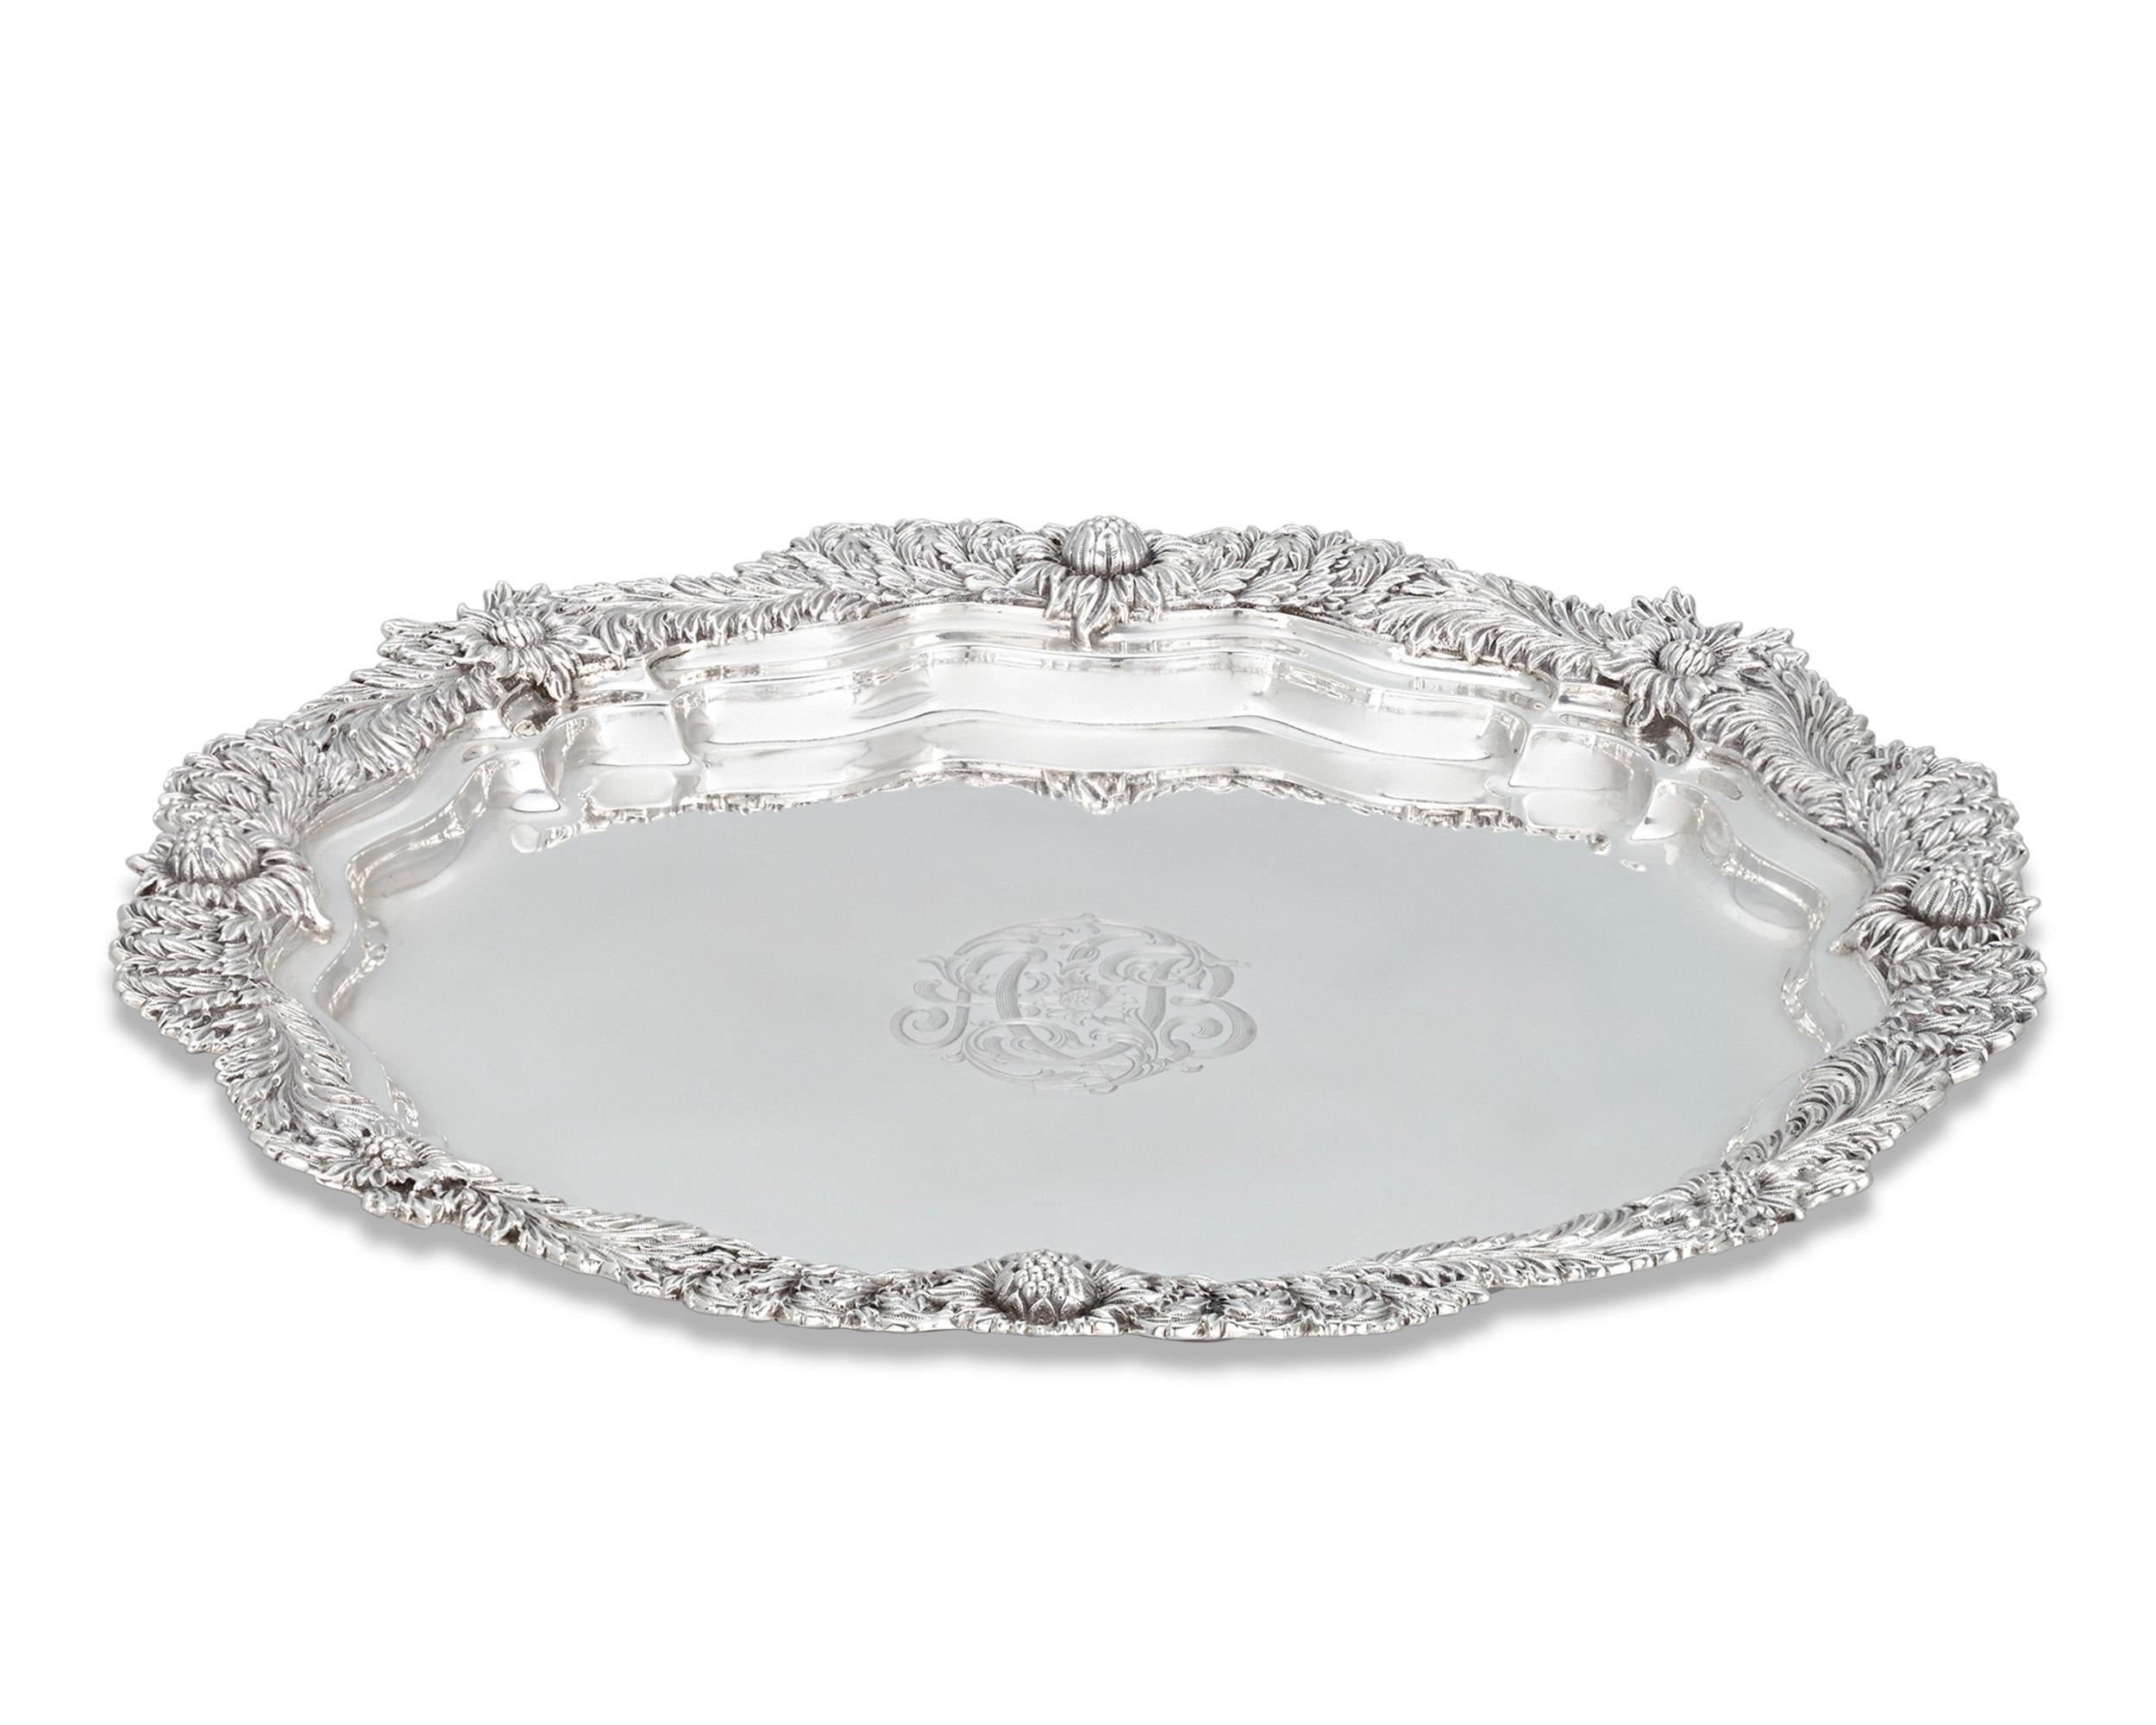 This impressive sterling silver serving tray was crafted by Tiffany & Co. Executed in the firm's famed Chrysanthemum pattern, the tray's decorative border is beautifully adorned with chrysanthemum blooms that follow the graceful curves of the